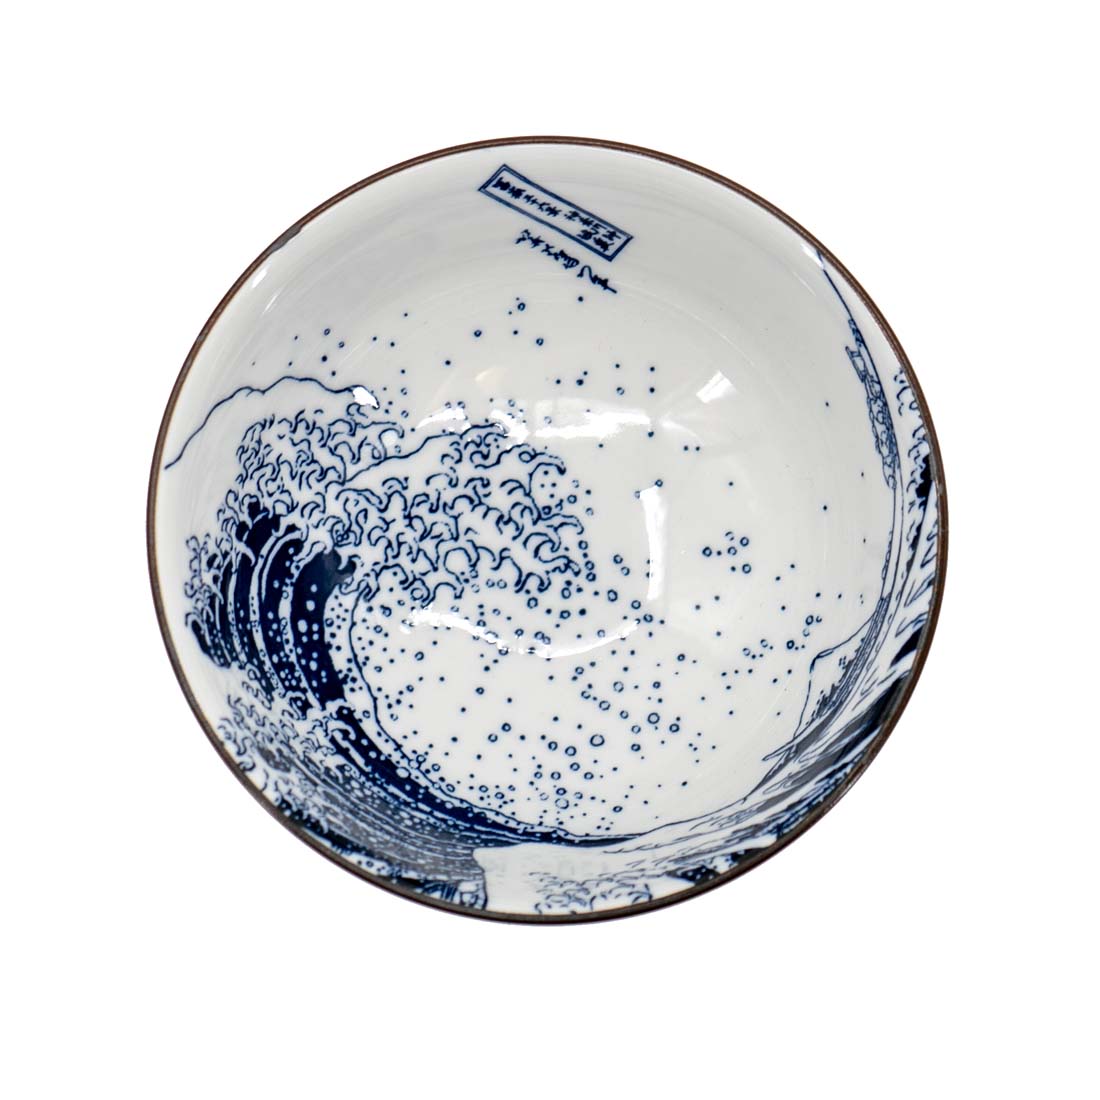 The Great Wave Ceramic Rice Bowl